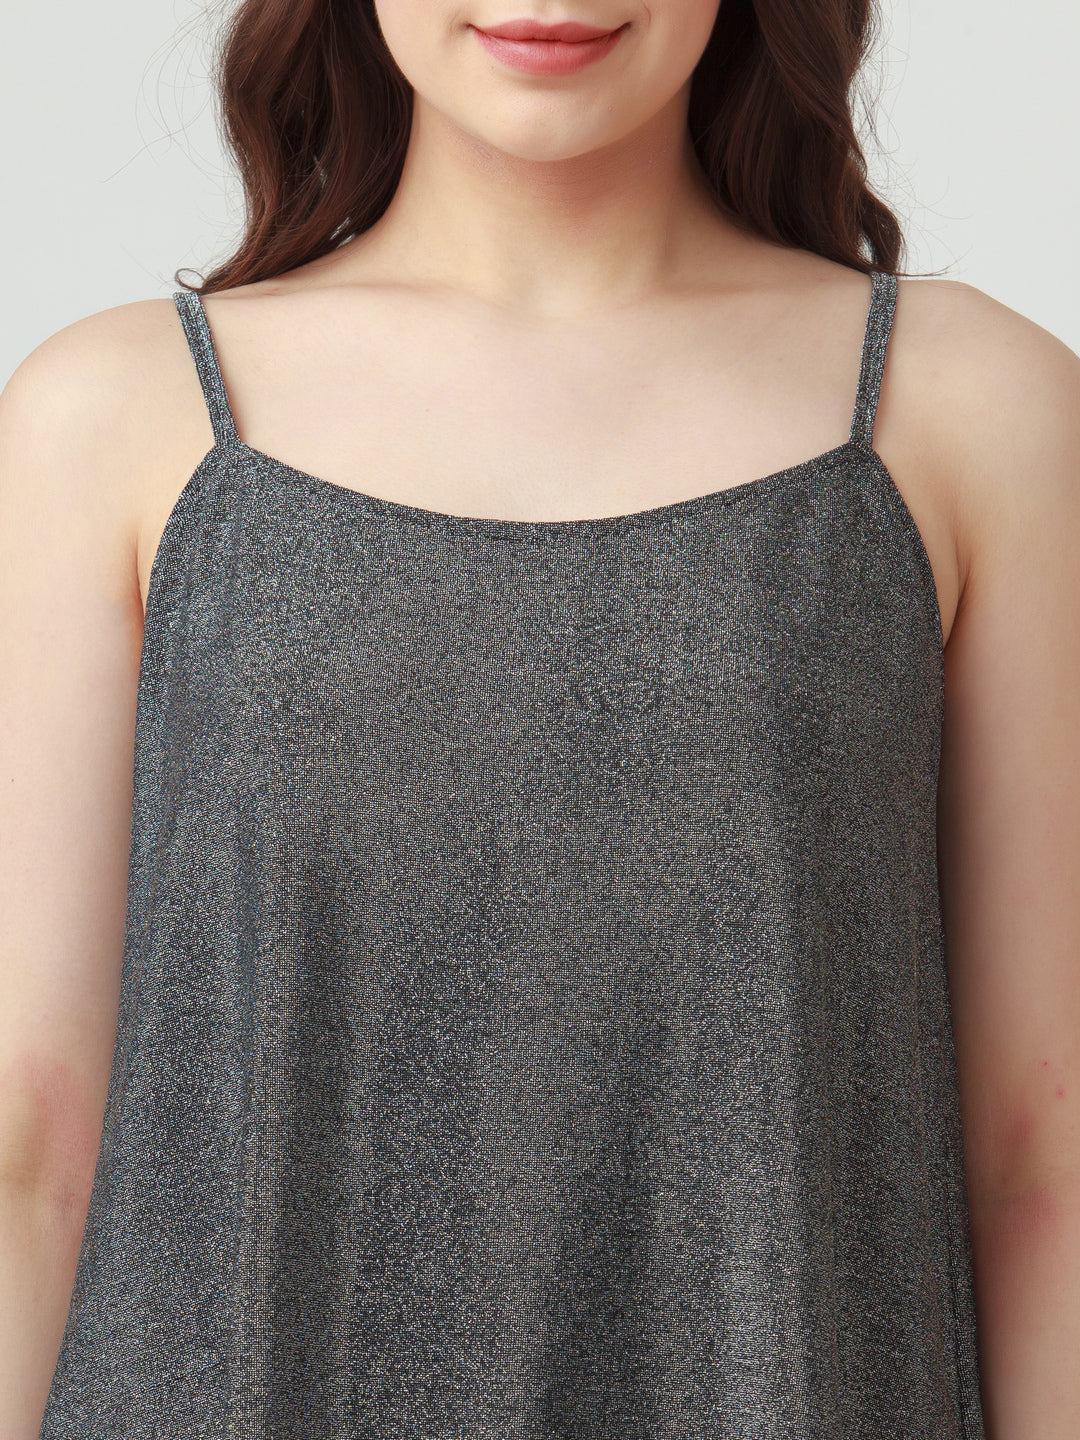 Silver Shimmer Top For Women